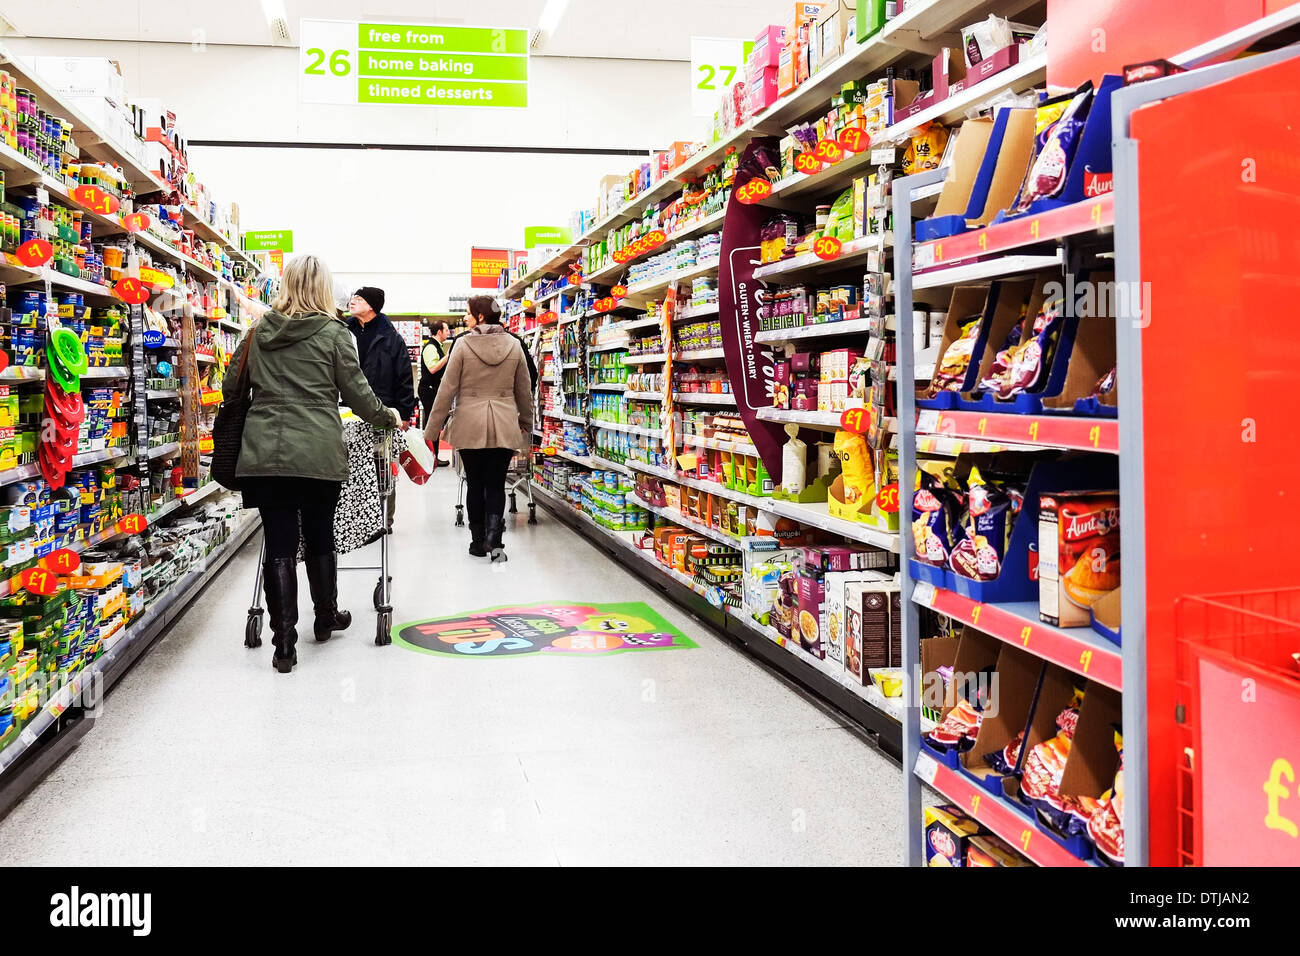 Shoppers in an Asda supermarket in the UK. Stock Photo